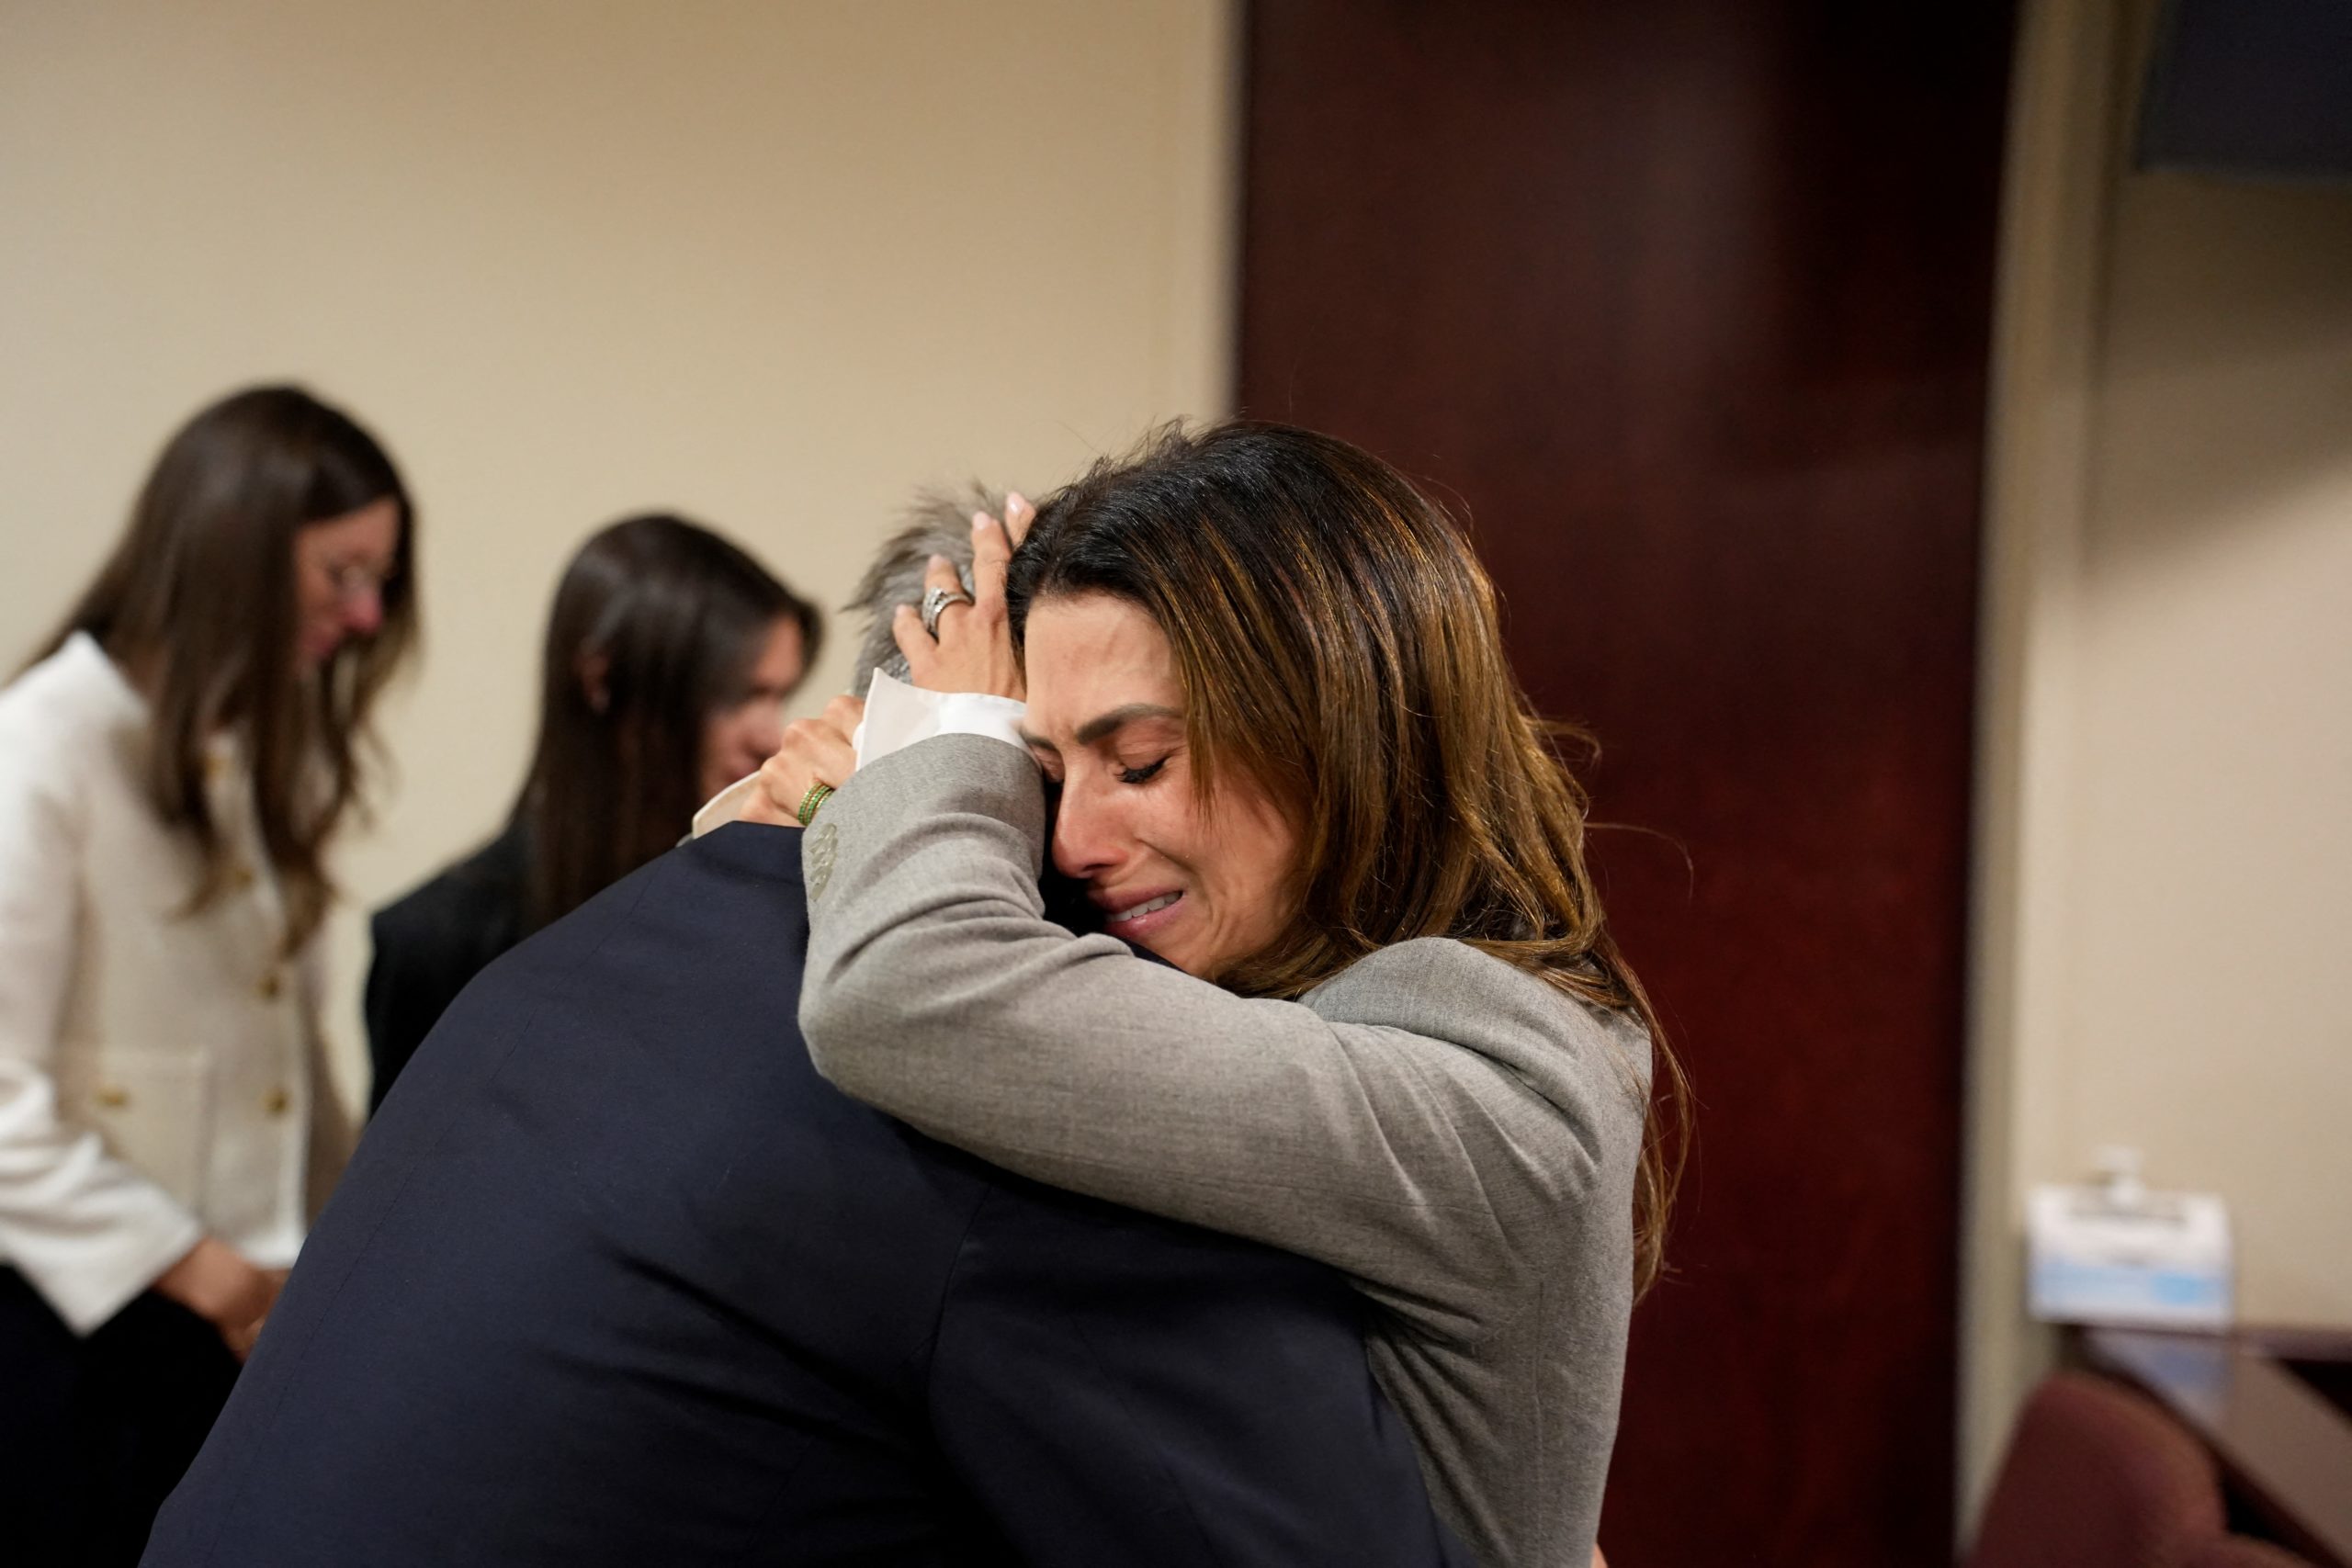 US actor Alec Baldwin and his wife Hilaria Baldwin embrace during his trial on involuntary manslaughter at Santa Fe County District Court in Santa Fe, New Mexico, on July 12, 2024. Baldwin's trial for involuntary manslaughter was dismissed by a judge Friday after she ruled that key evidence over a fatal shooting on the set of "Rust" had been withheld from the defense. (Photo by Ramsay de Give / POOL / AFP) (Photo by RAMSAY DE GIVE/POOL/AFP via Getty Images)